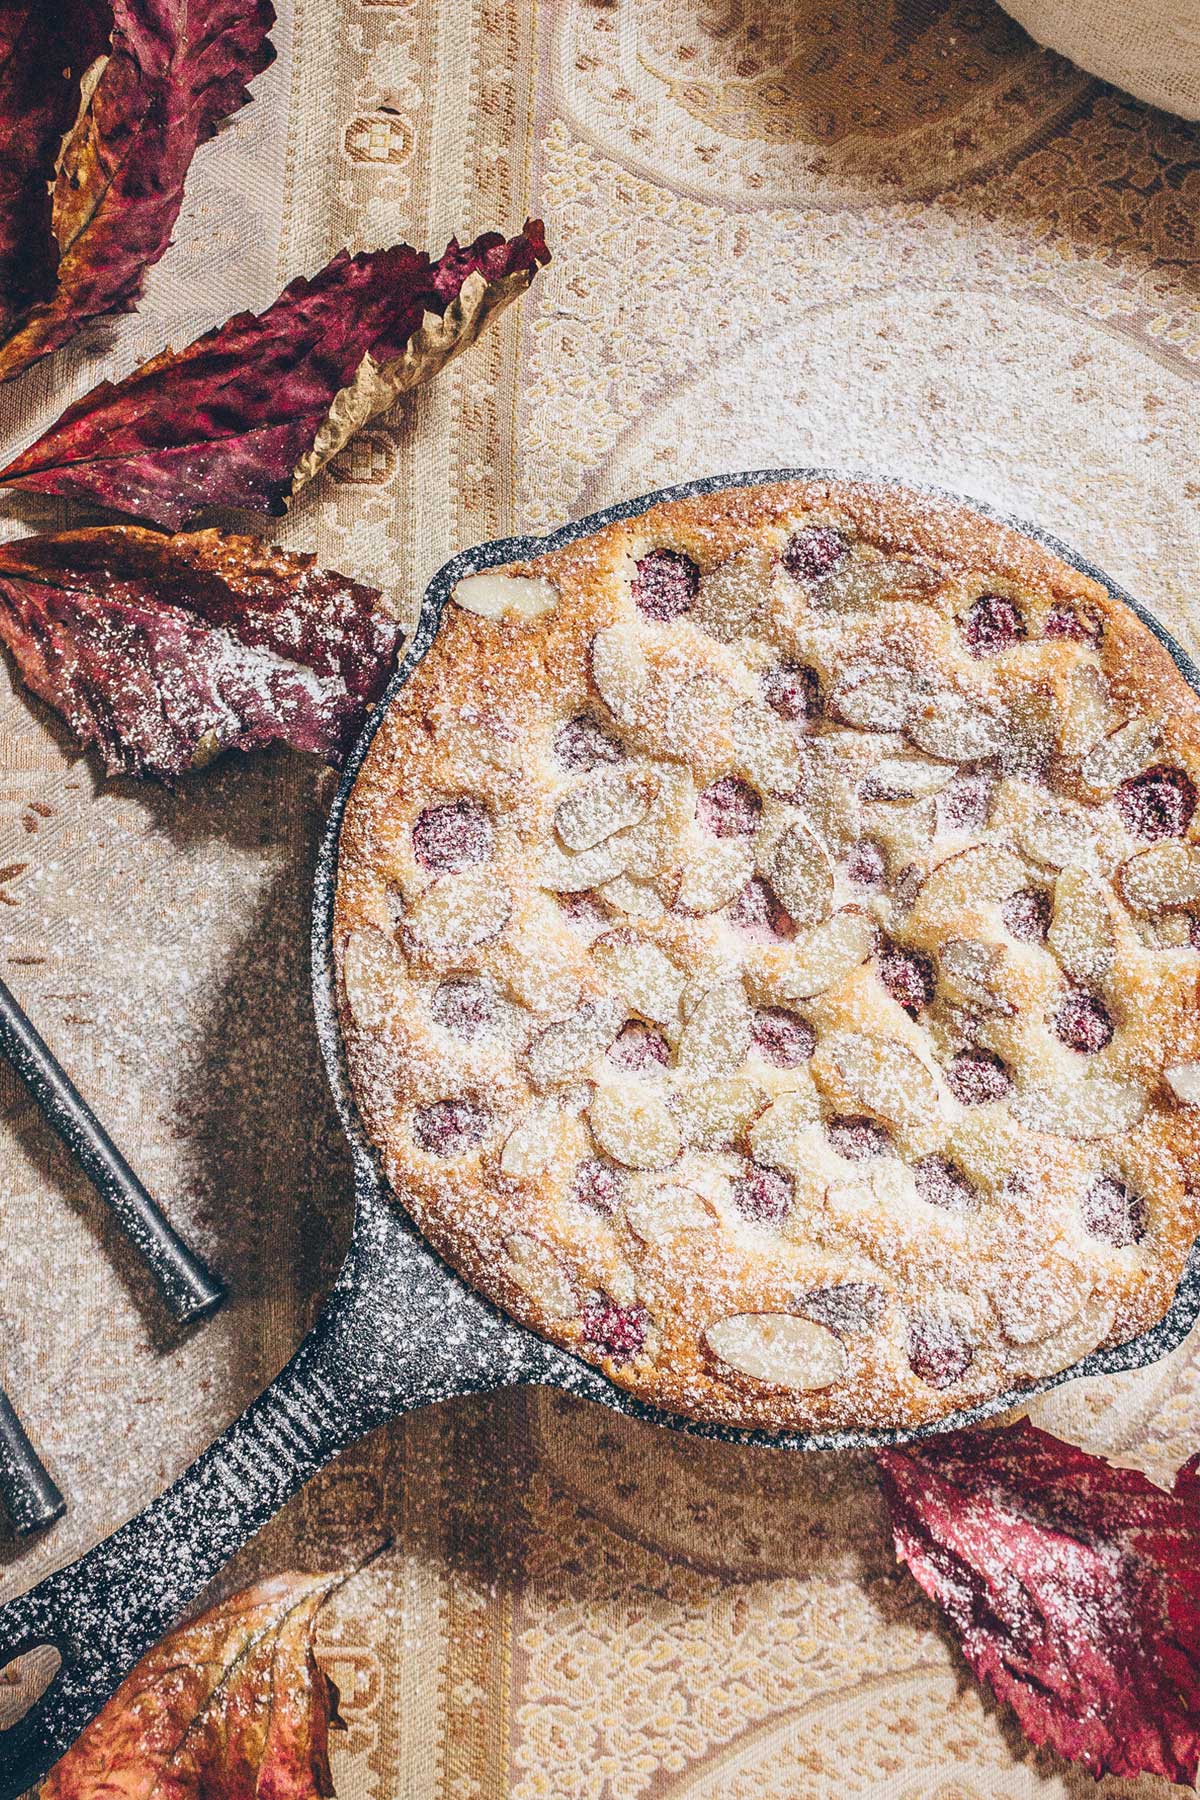 A Raspberry Almond cake baked in a cast iron skillet on a table with dried burgundy red leaves and a pale sand colored paisley tablecloth. The cake is being dusted with powdered sugar, falling from above.